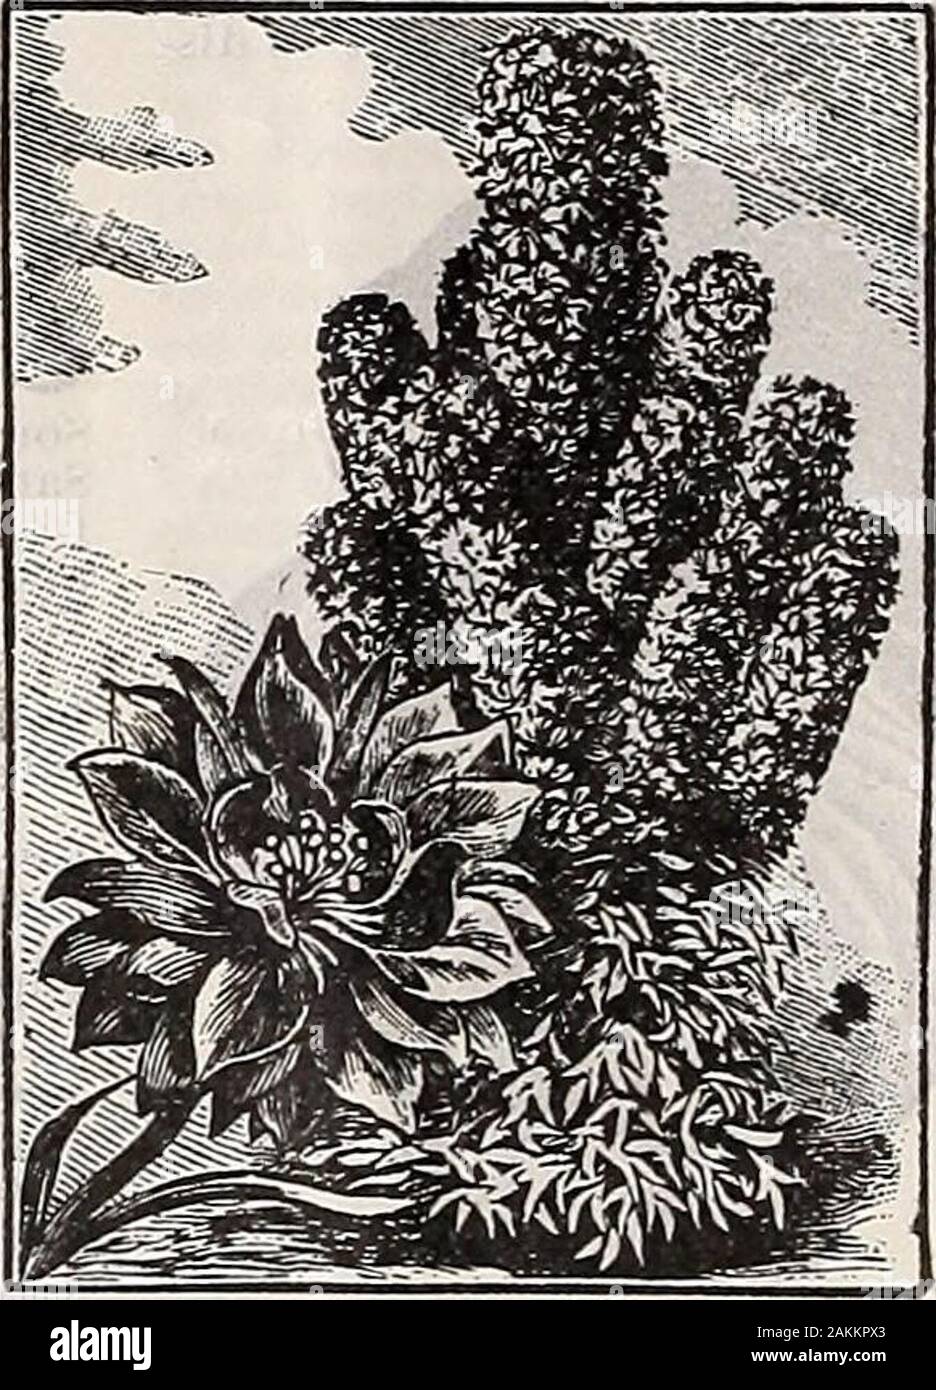 H.GHastings & Co: spring 1907 catalogue . re freely than the doubles. Packet. 10 cents. Cactus Dahlias—This new strain is very popular wherever grown, being especially valuable for cutflower work. Petals of the large flowers are beautifully pointed and the range of coloring is remarkablysatisfactory. Mixed colors. Pkt., 15c; 2 for 25c. IP r&gt;nUc/&gt;VinH7{a Or California Poppy—One JlrfSCn5&gt;t«IltJll^,lCX of the most popular flow-ers for bedding in the South. Sow as early in the springas ground can be worked, scattering seed thinly over thesurface and raking in lightly. They are low spreadi Stock Photo